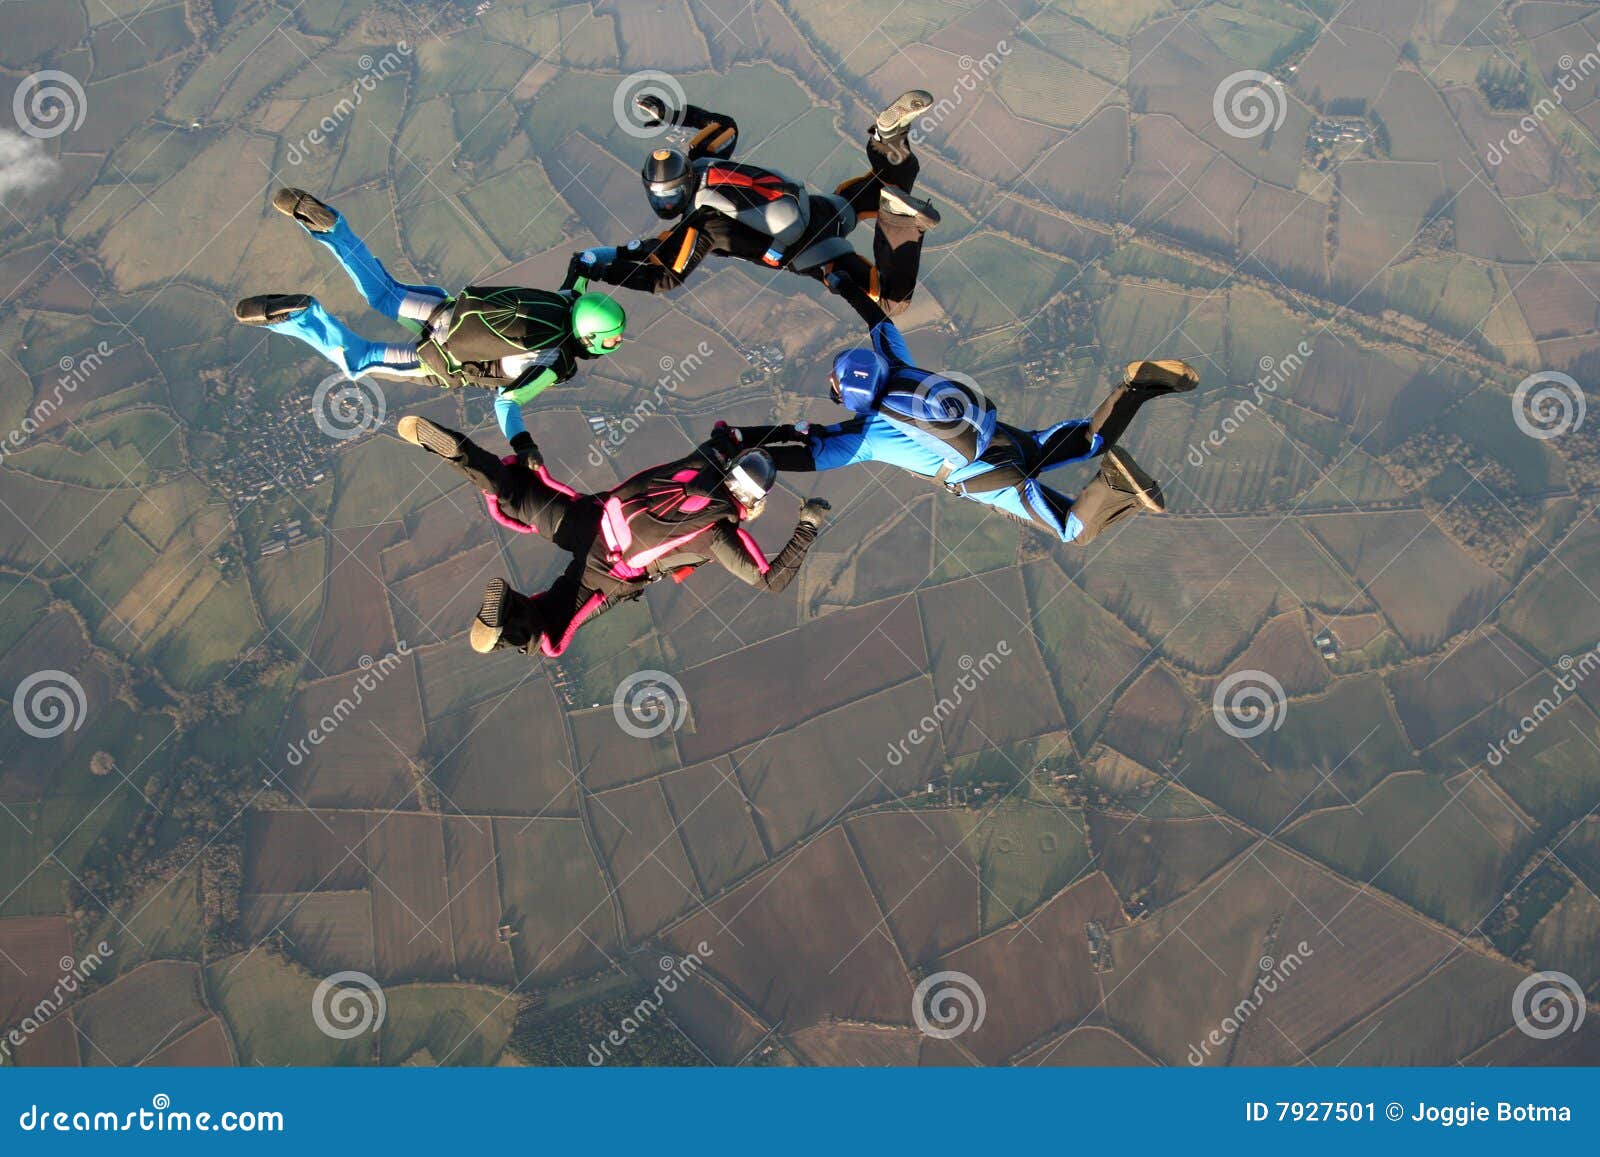 four skydivers doing formations